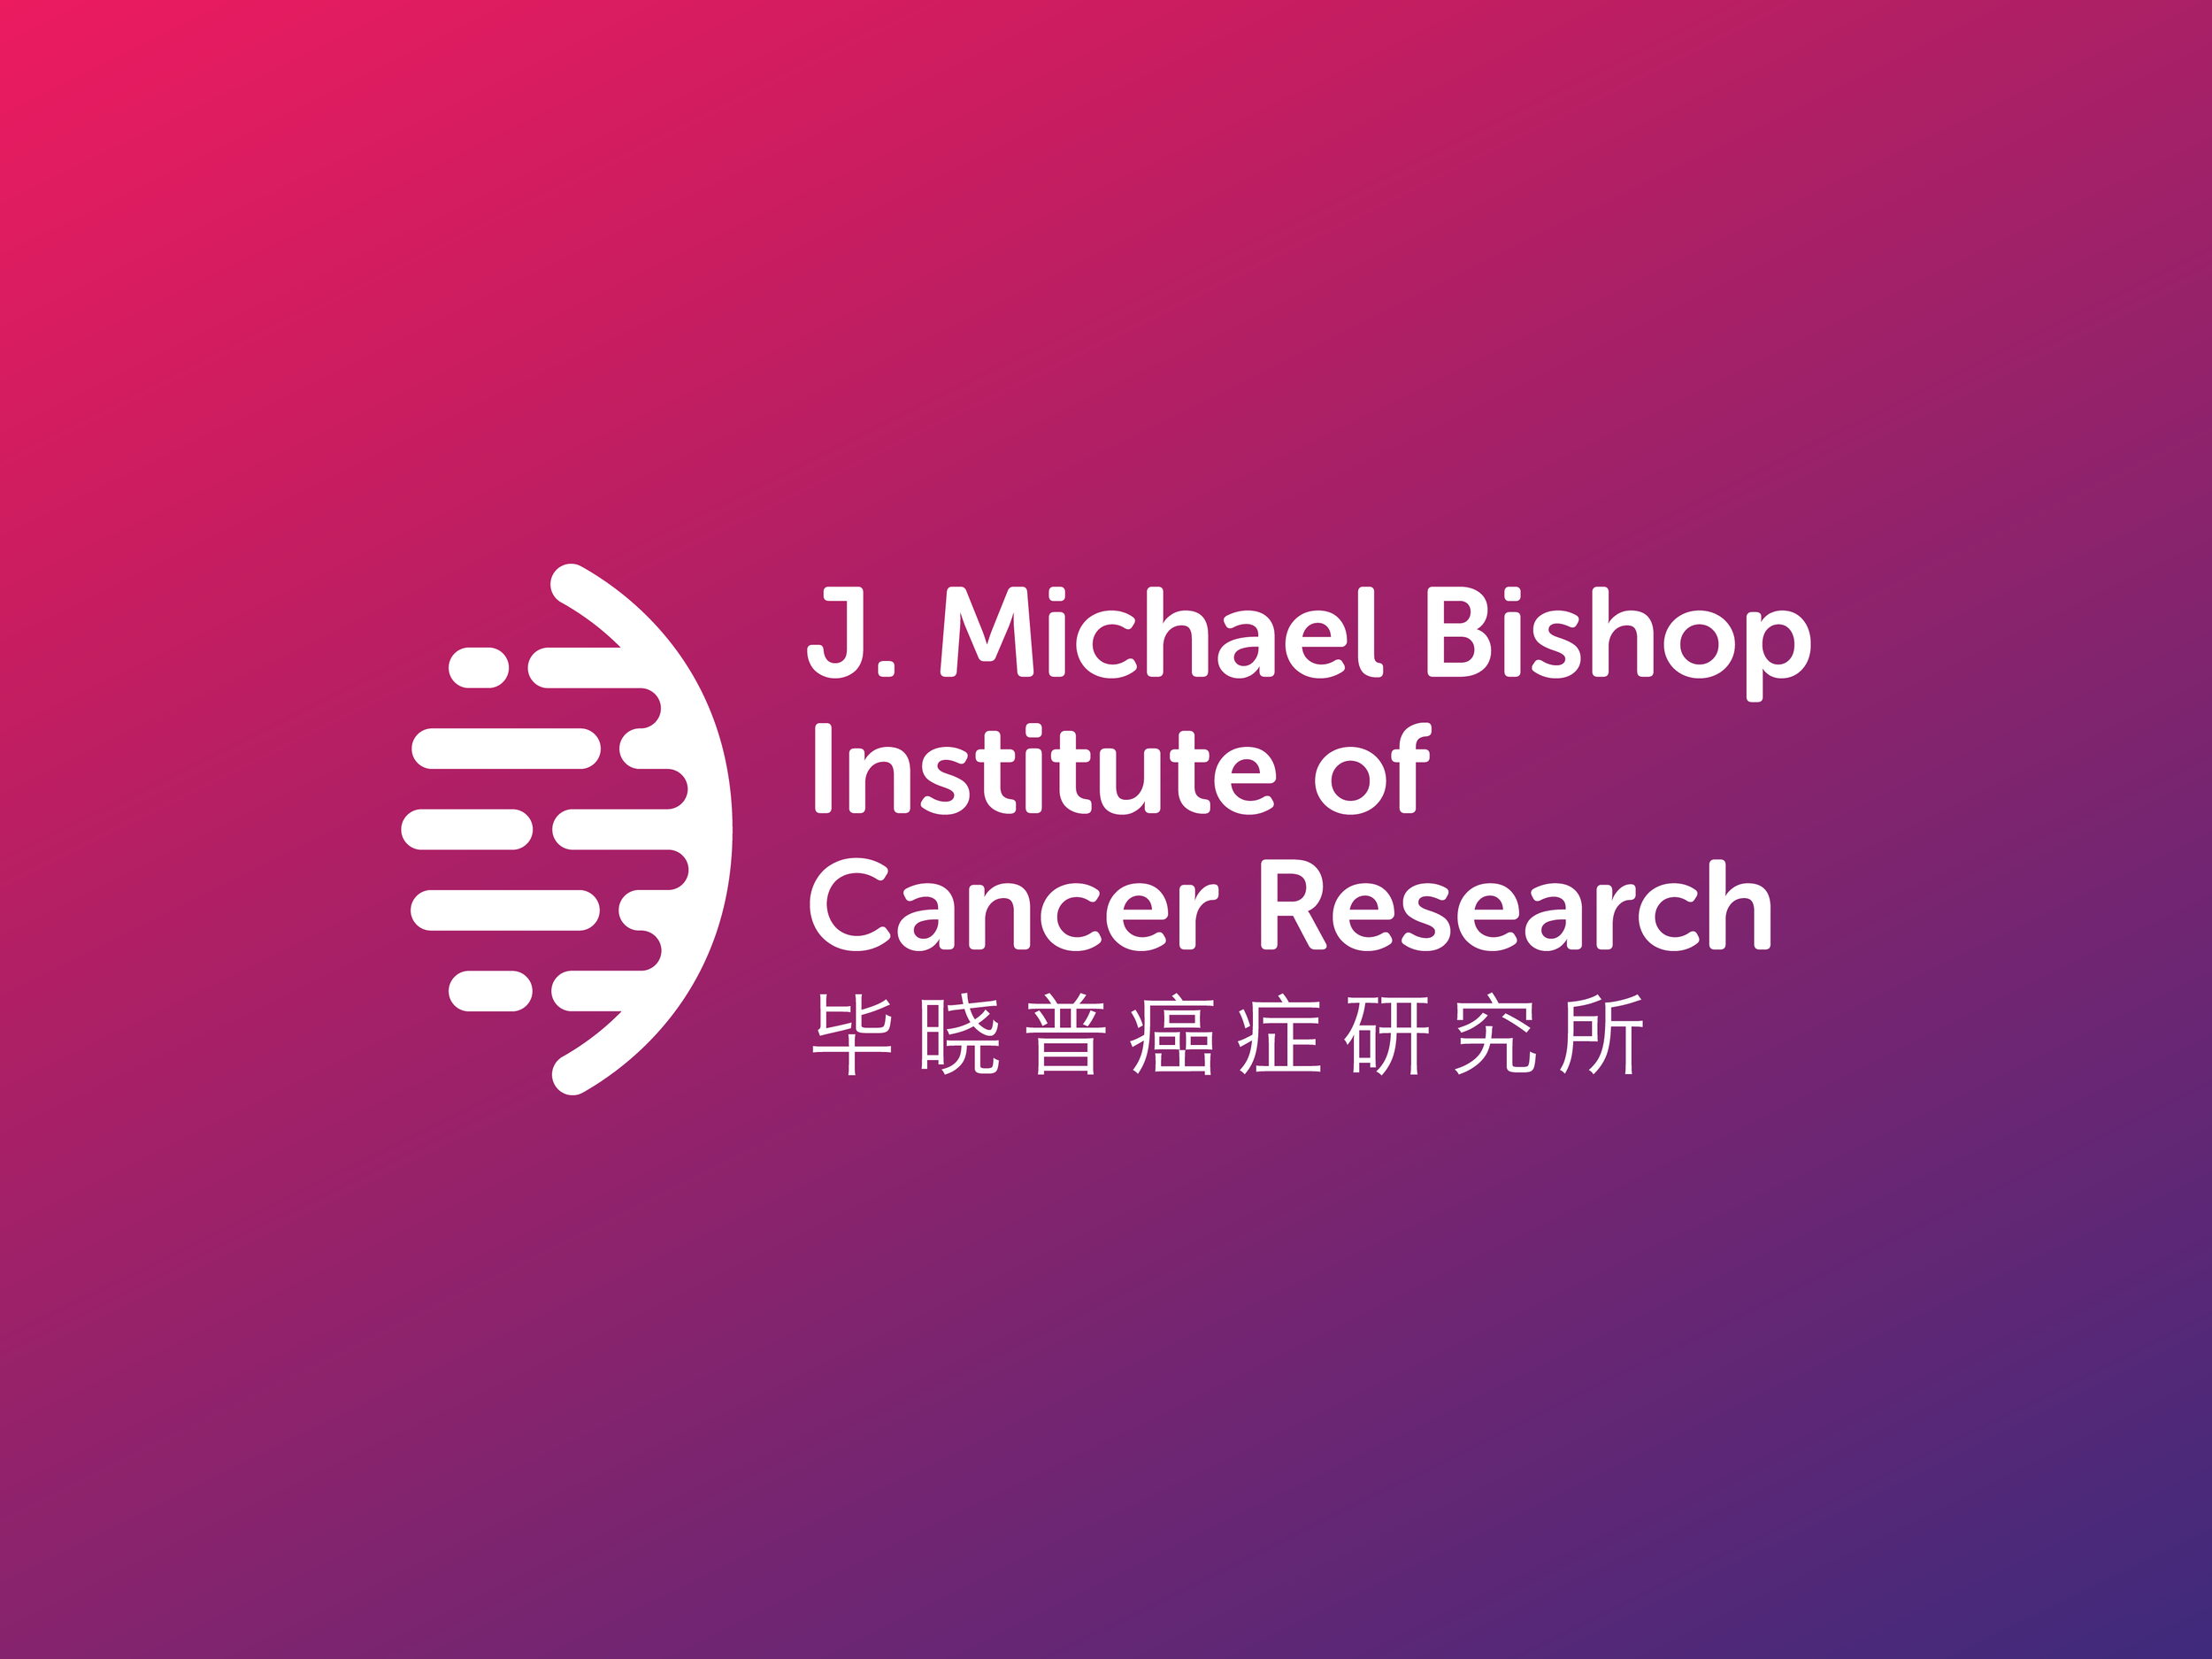 Delivering High-Quality Graphic Design Solutions for JMBICR, the Cancer Research Institute in Chengdu, China.